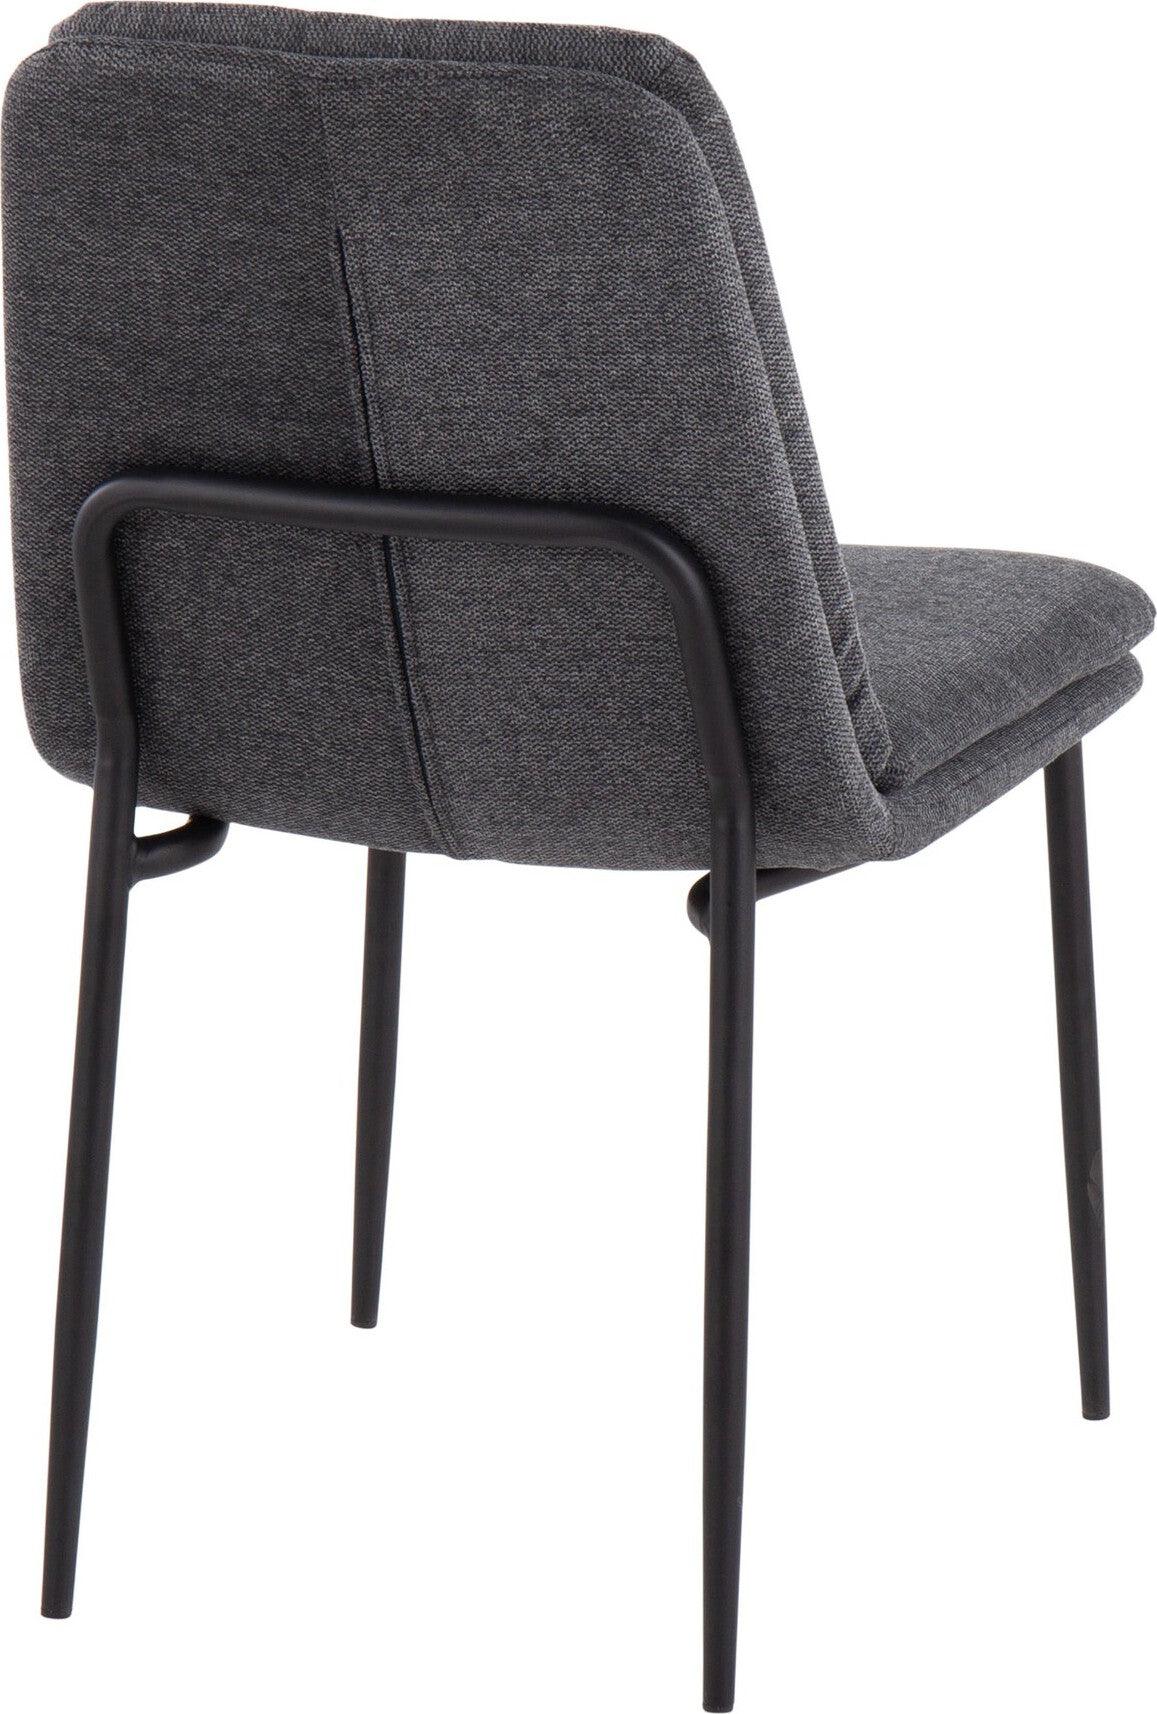 Lumisource Dining Chairs - Smith Contemporary Dining Chair in Black Steel and Charcoal Fabric (Set of 2)